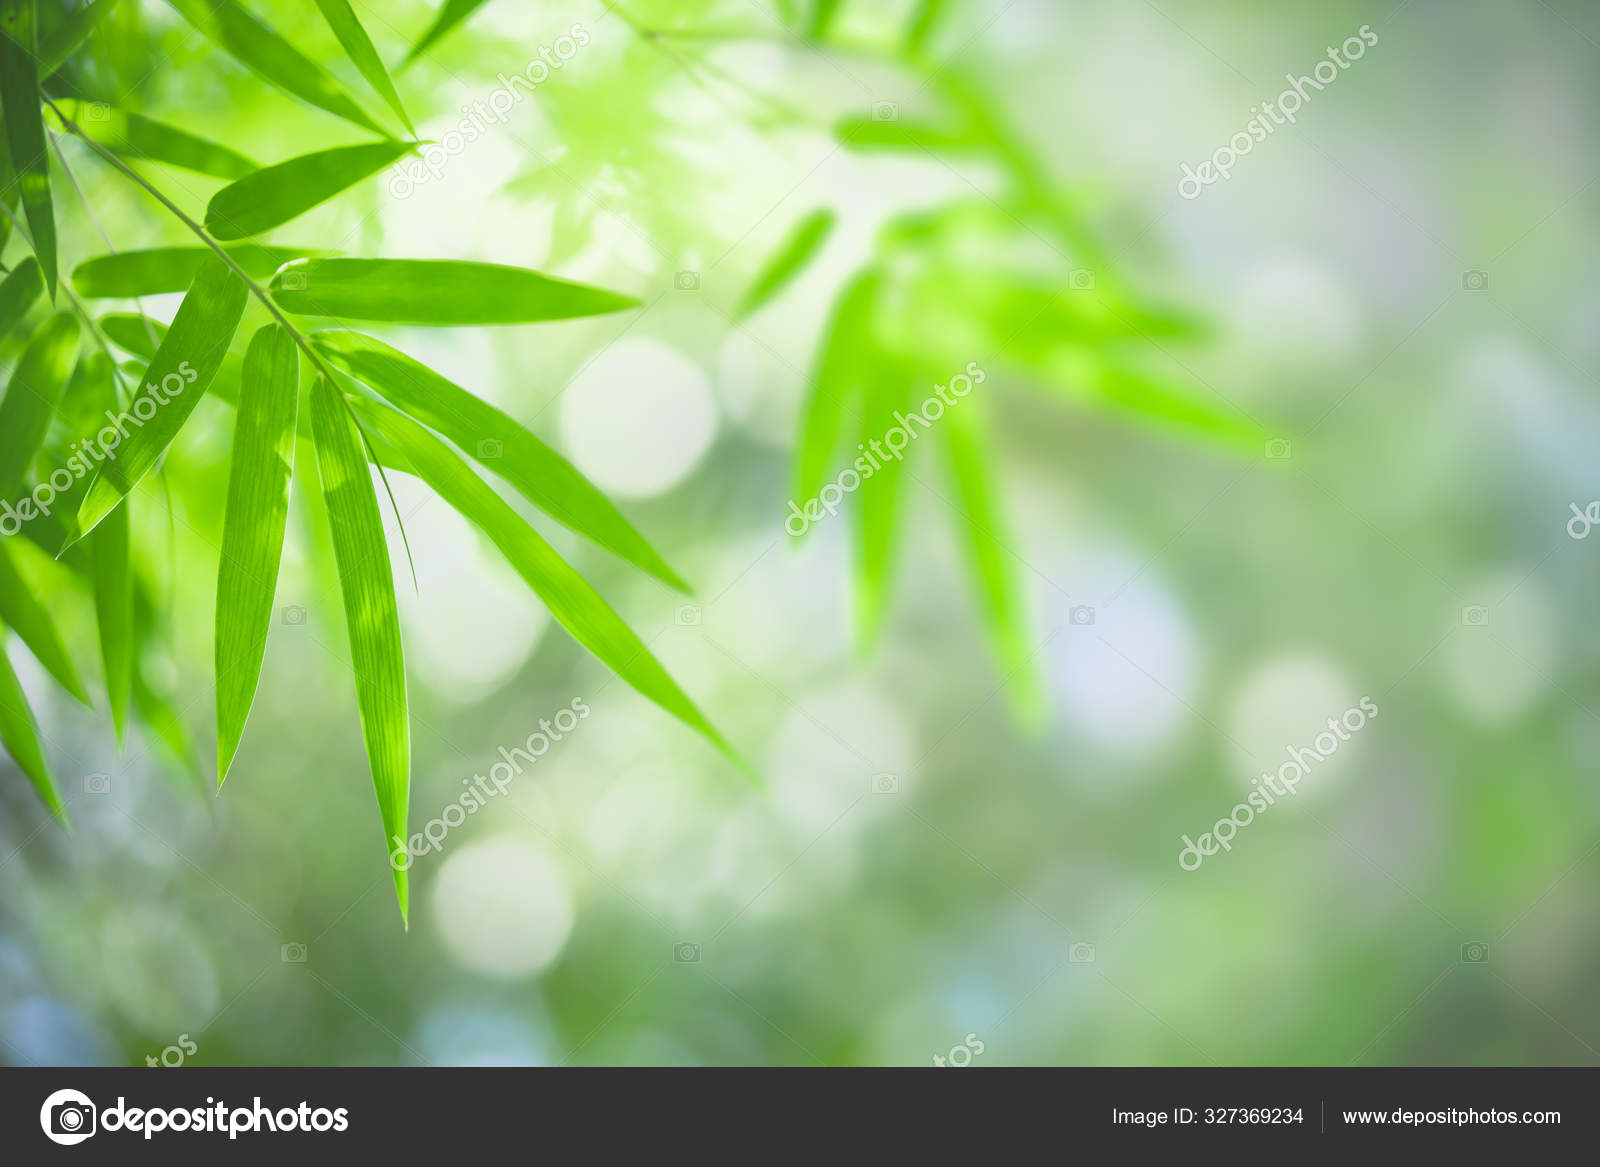 Bamboo Wallpaper Stock Photos, Images and Backgrounds for Free Download